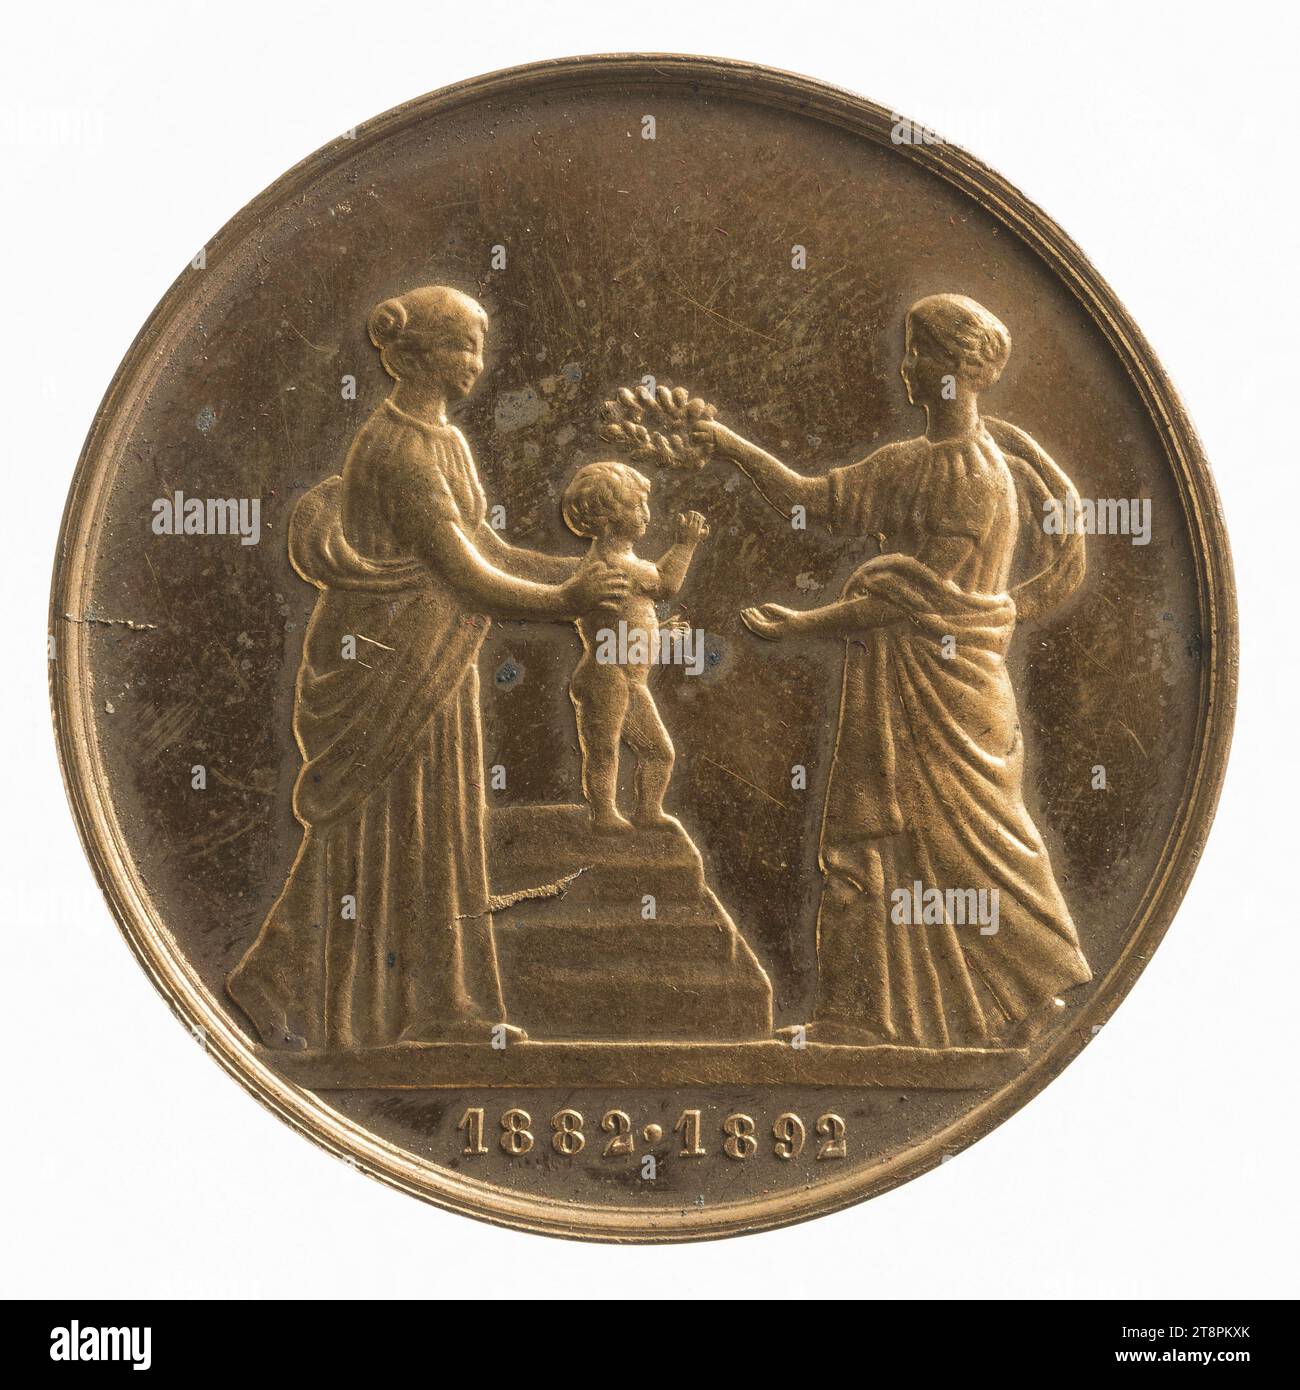 Medal of honor of the contest of hygiene of the childhood of Paris, 1892, In 1892, Numismatic, Medal, Copper, Gilding = gilding, Dimensions - Work: Diameter: 3.7 cm, Weight (type dimension): 17.25 g Stock Photo